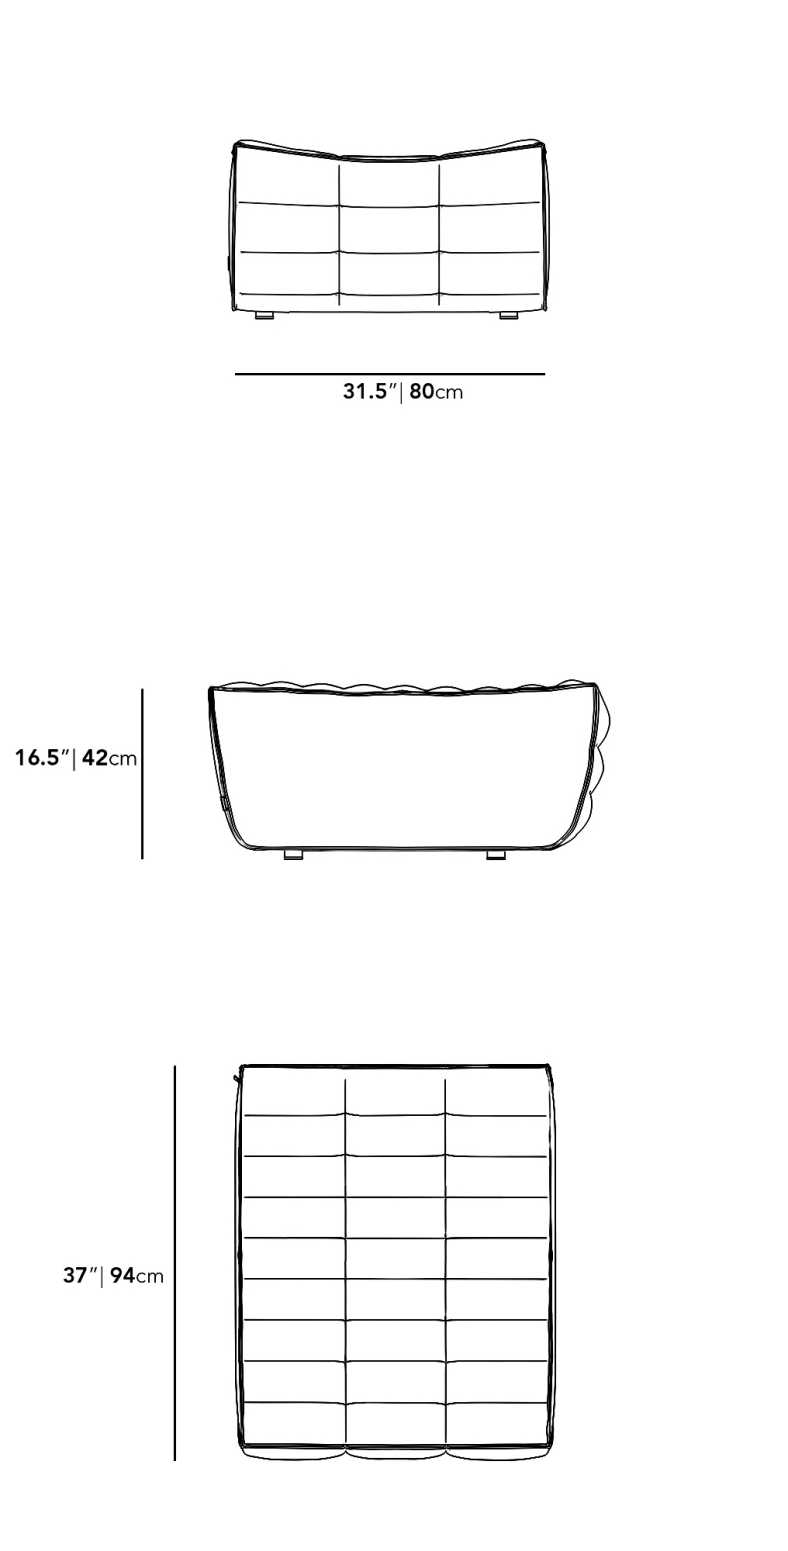 Dimensions for Tanner Ottoman